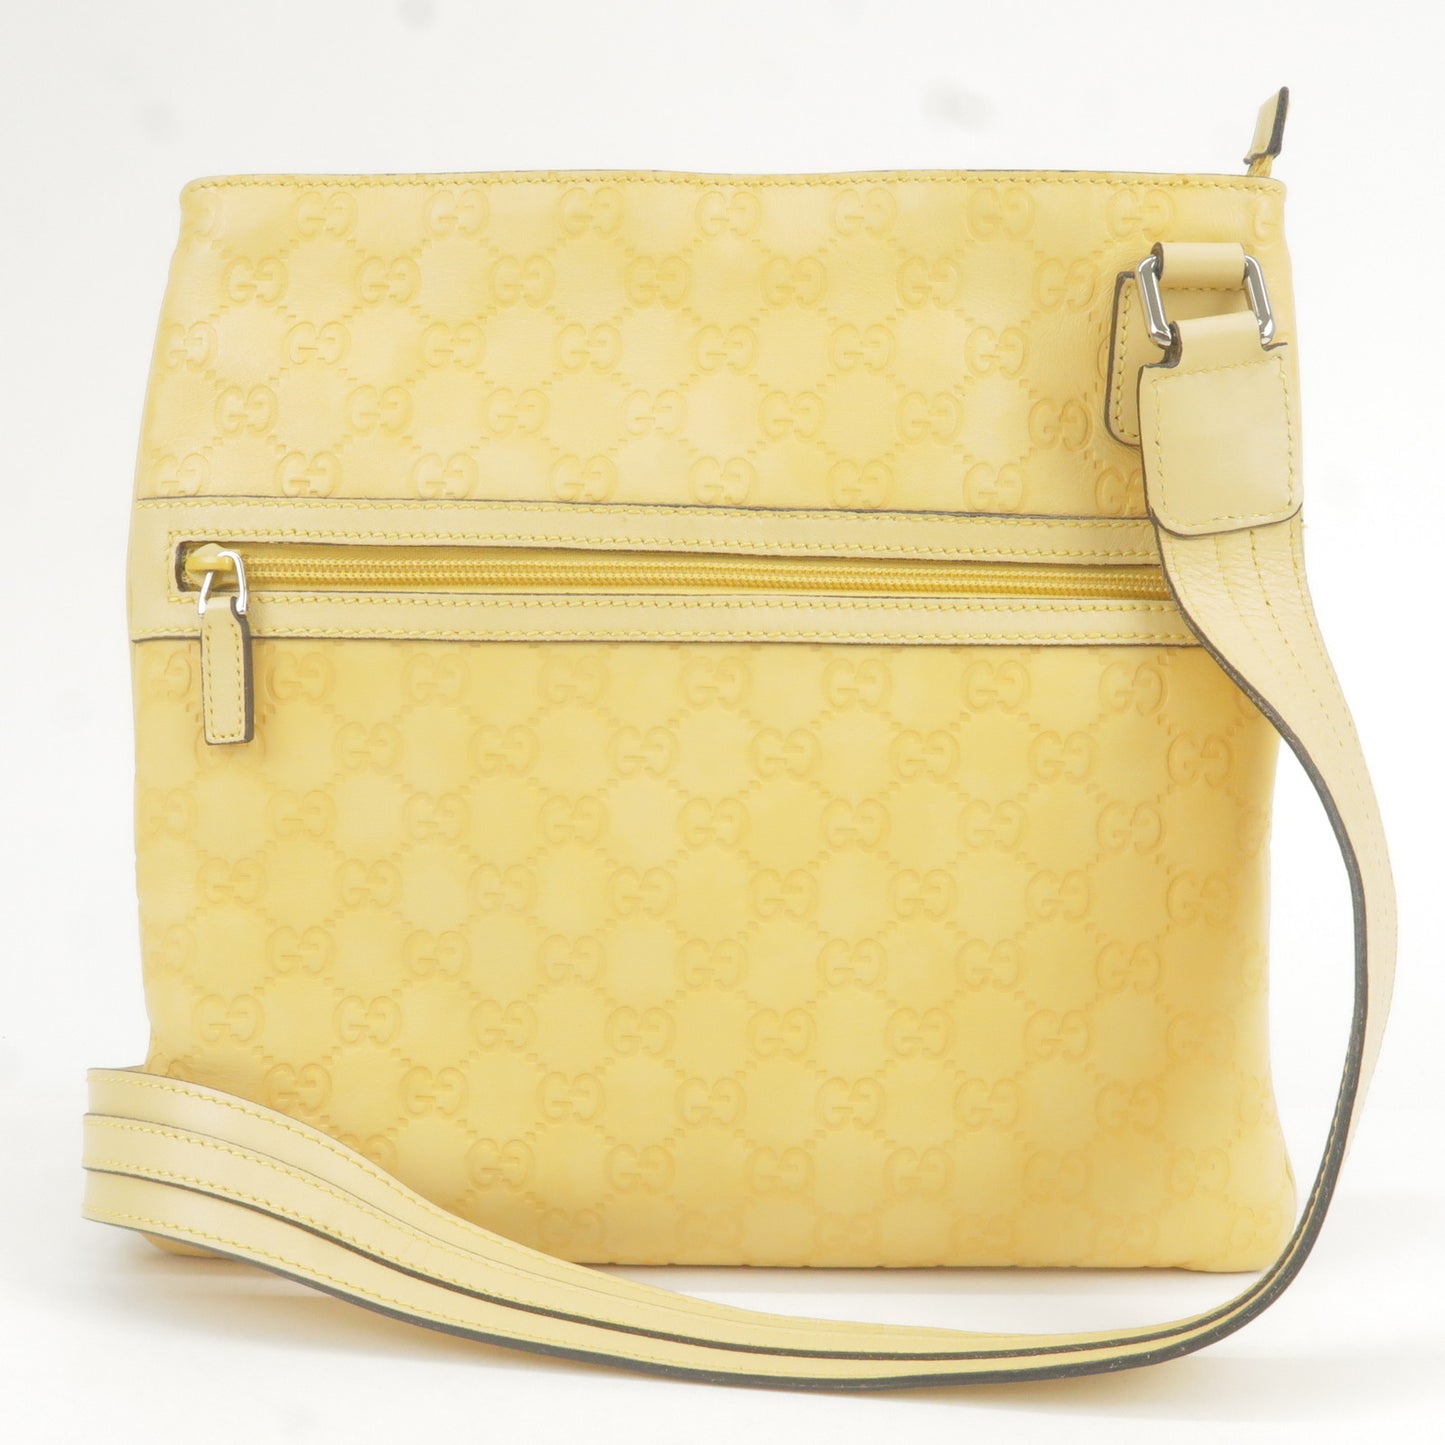 GUCCI Guccissima Leather Shoulder Bag Hand Bag Yellow 264217